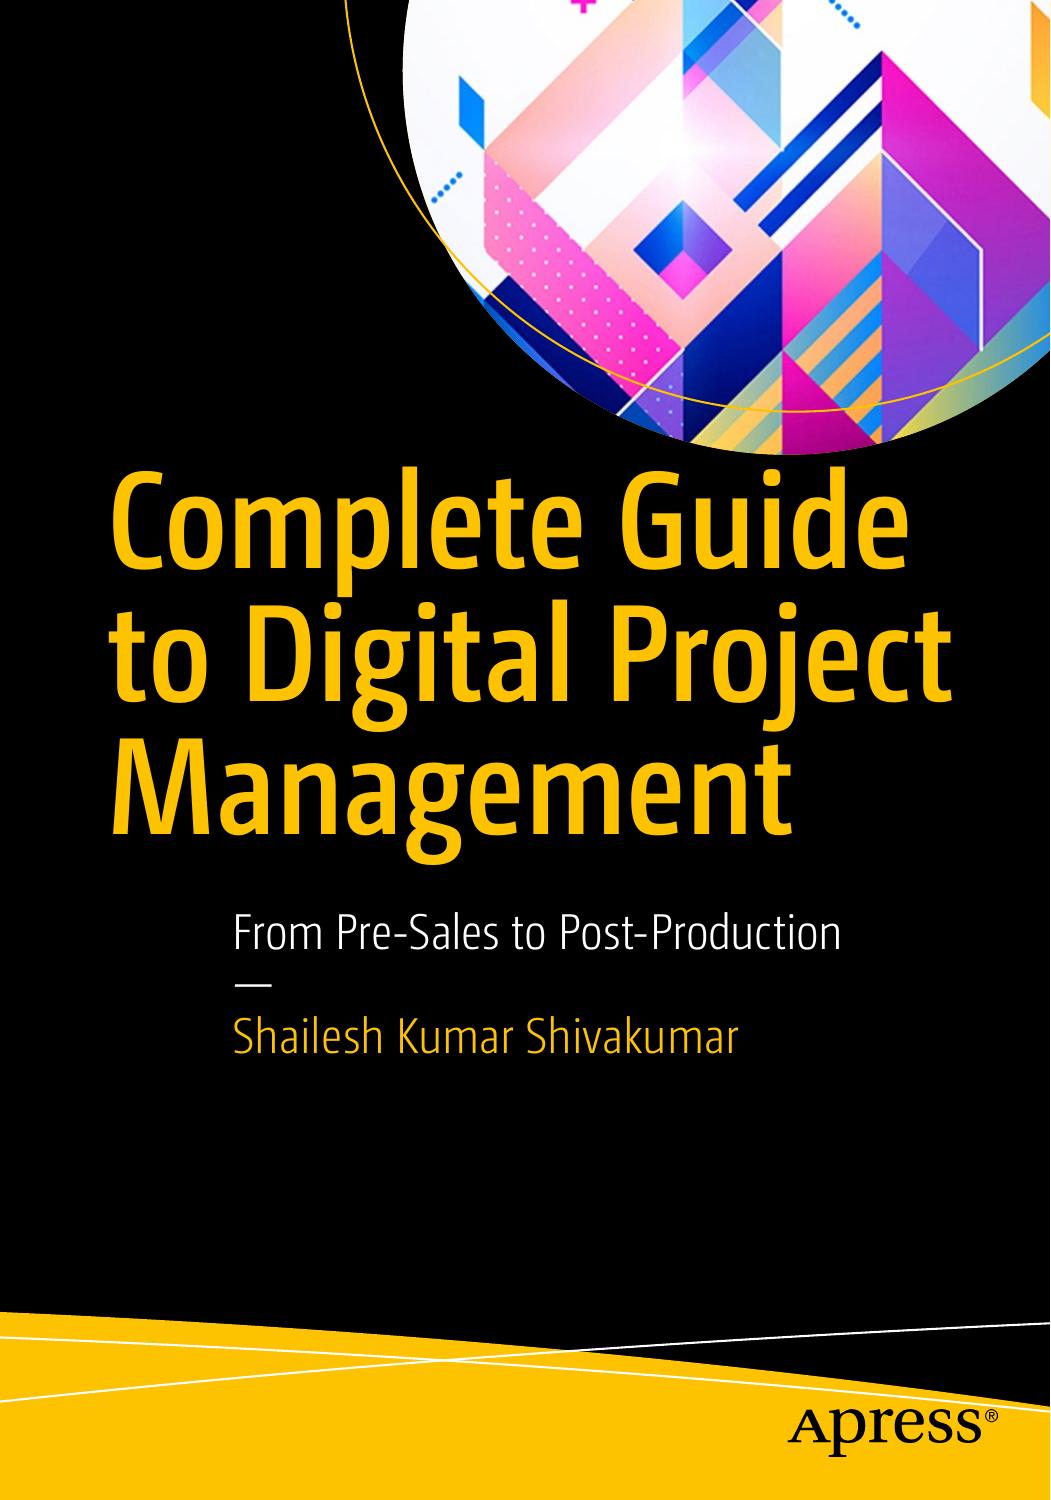 Complete Guide to Digital Project Management From Pre-Sales to Post-Production 2018